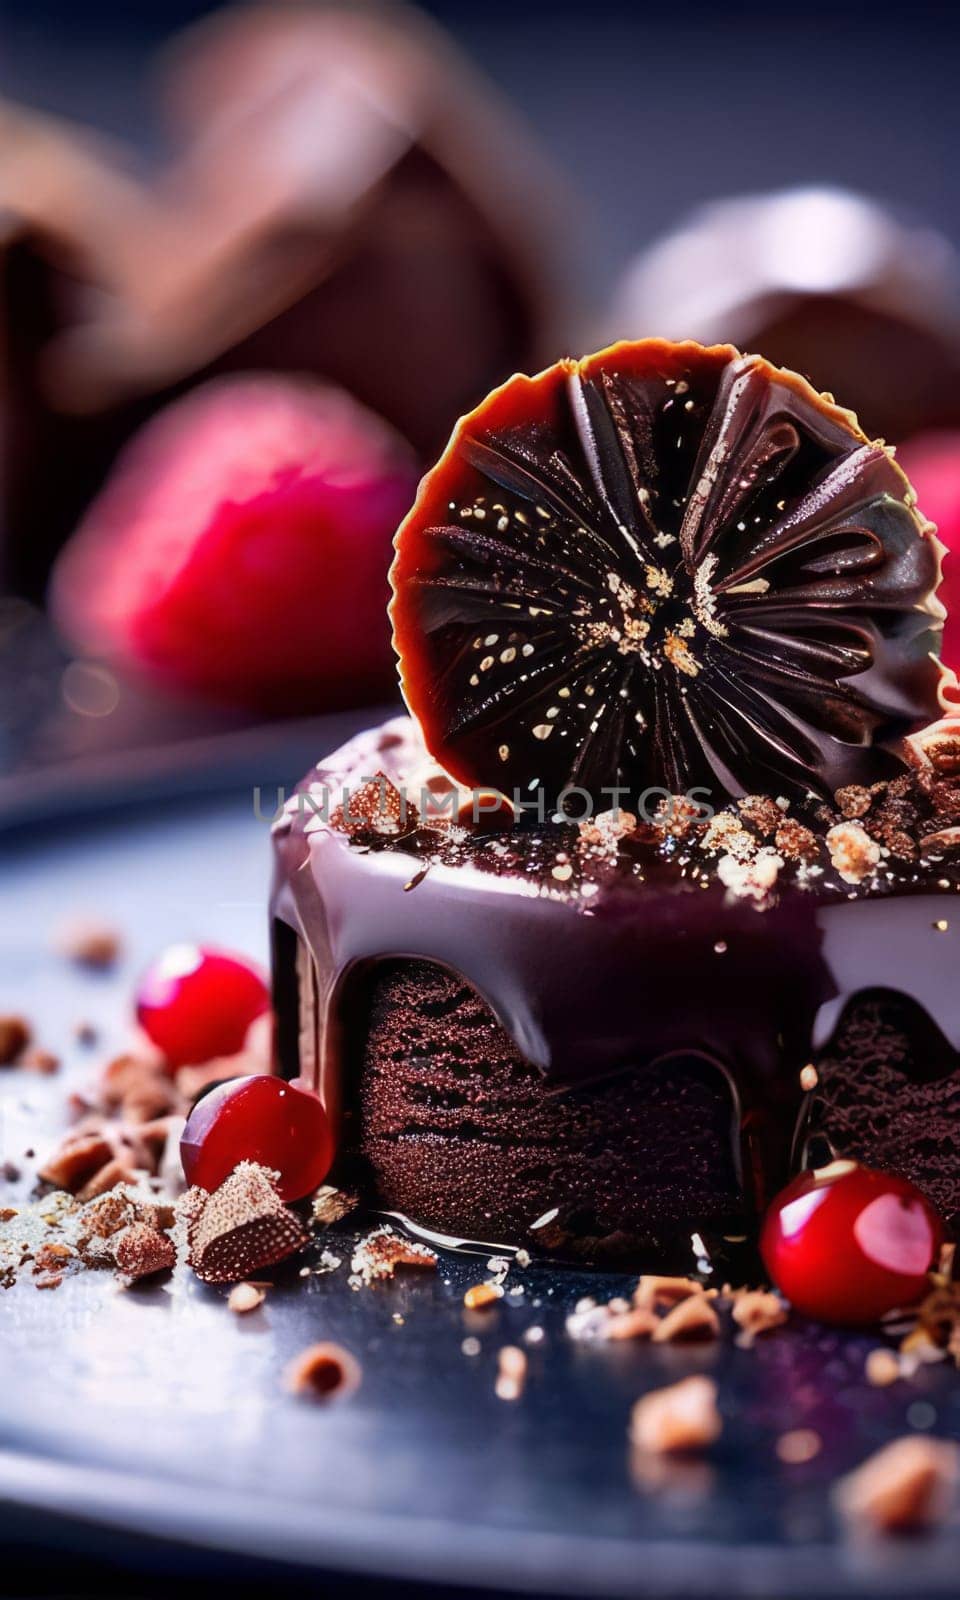 Decadent piece of chocolate cake oozing with rich, velvety chocolate sauce, tempting you with its irresistible sweetness. For recipe websites, cookbooks, dessert advertisements, cafe, culinary blog